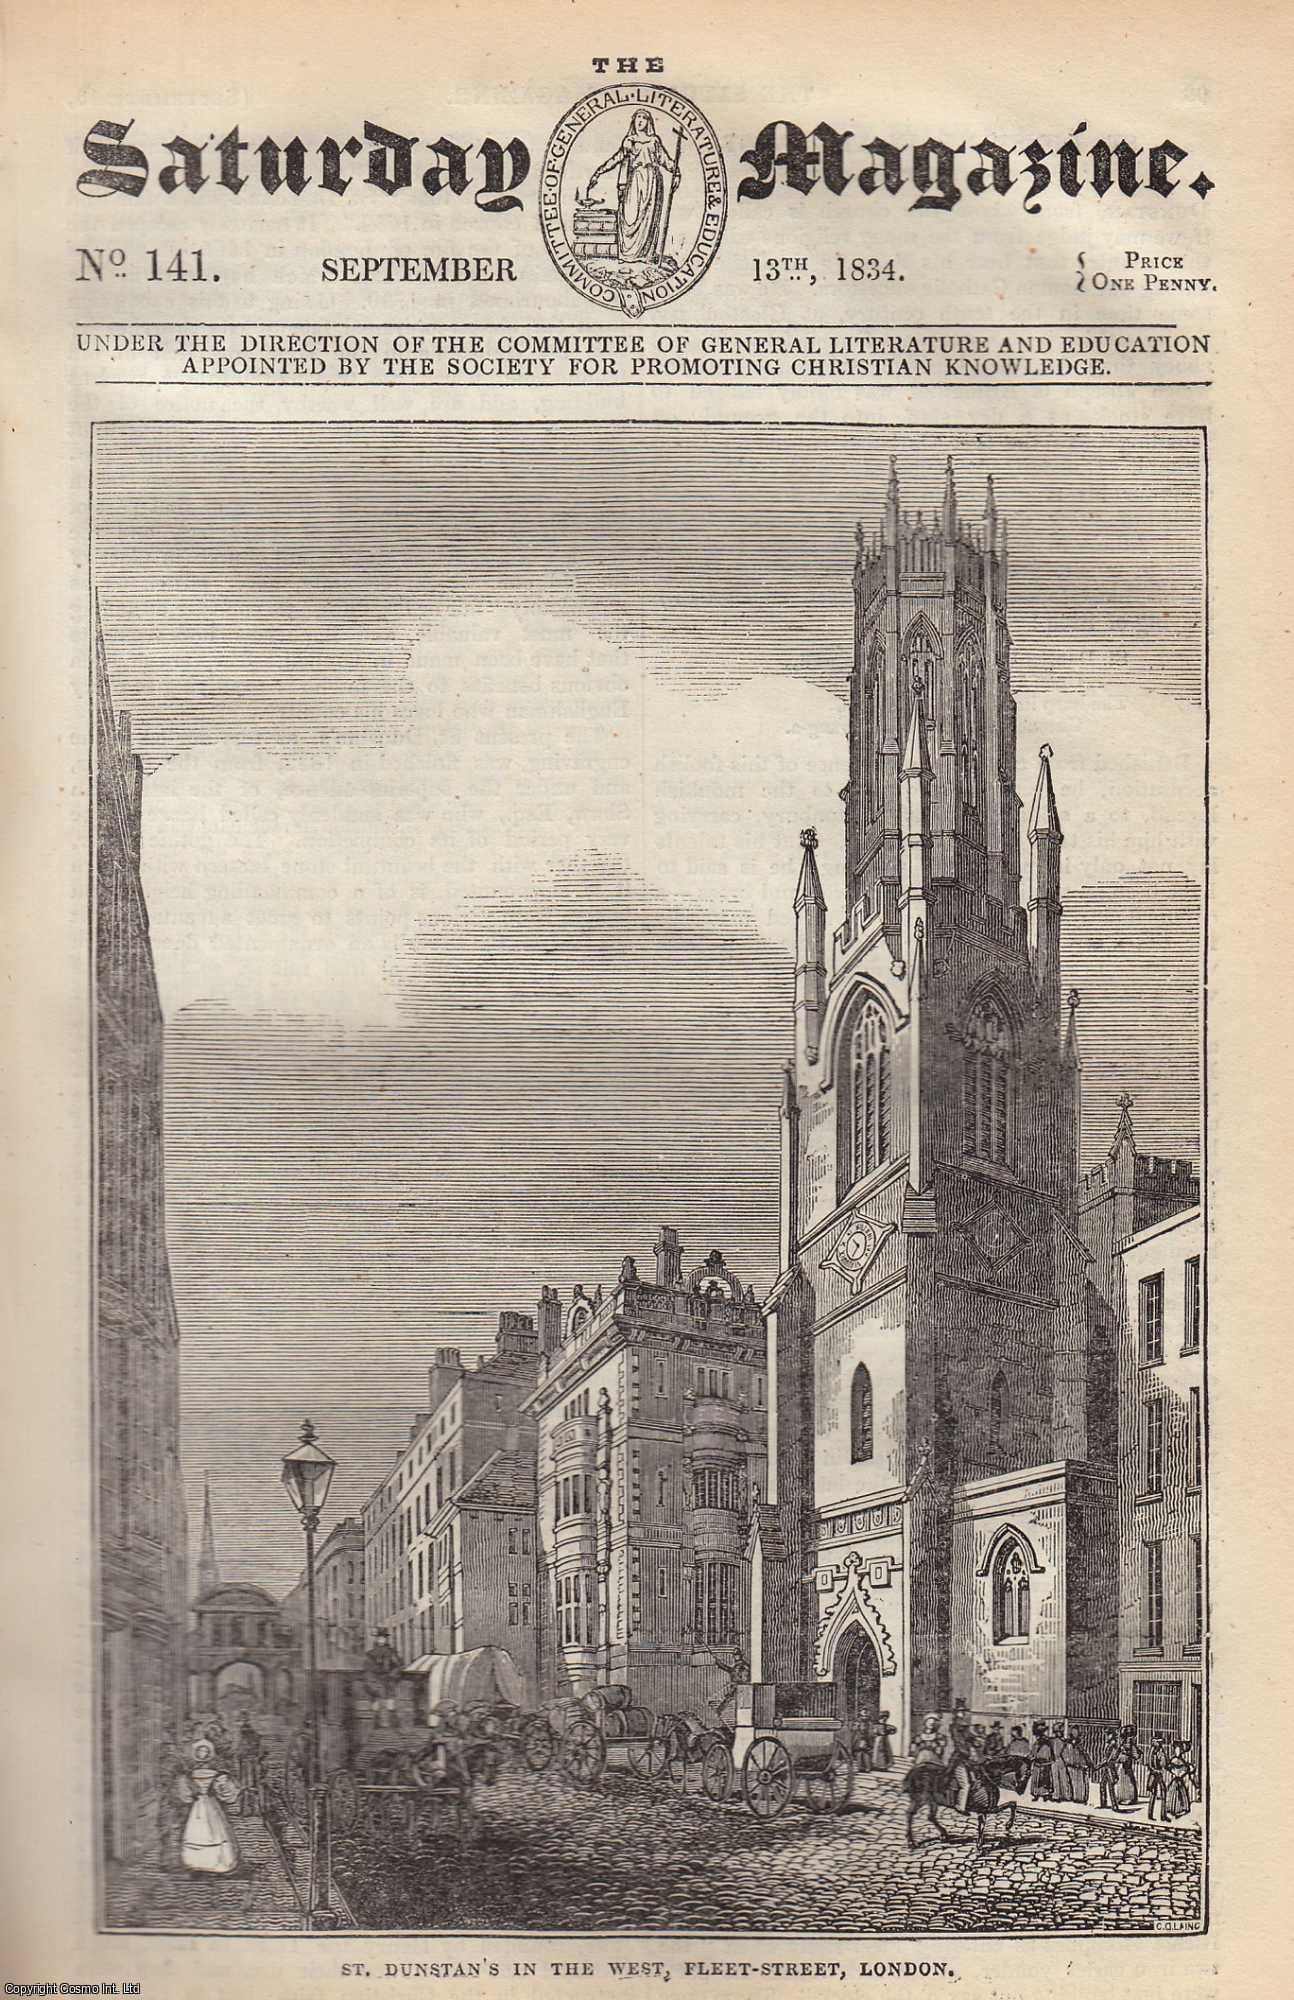 Saturday Magazine - St. Dunstan's in The West, Fleet-Street, London; The Flesh-Fly. Issue No. 141. September, 1834. A complete rare weekly issue of the Saturday Magazine, 1834.